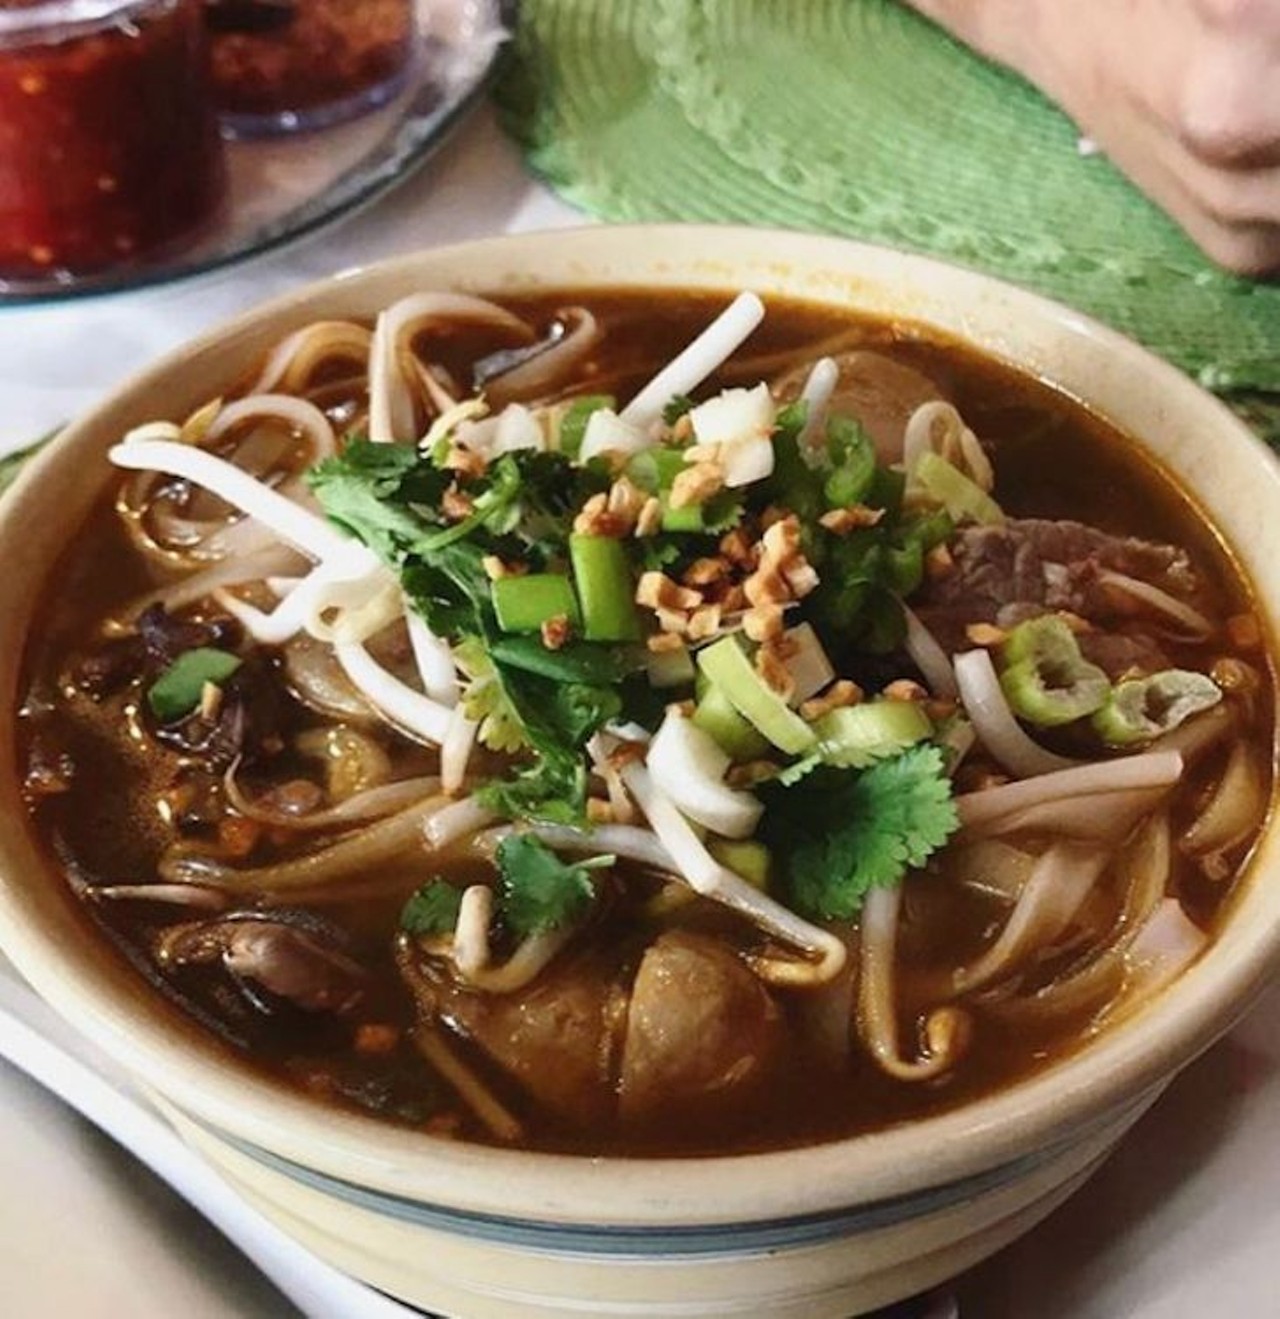 Thai Island
2522 S Semoran Blvd., (407) 412-6909
This quaint spot serves up major flavor. The tom yum soup, curry puff and yum beef salad are all delicious choices from the menu to make a tremendous meal.
Photo via kassyeatz/Instagram